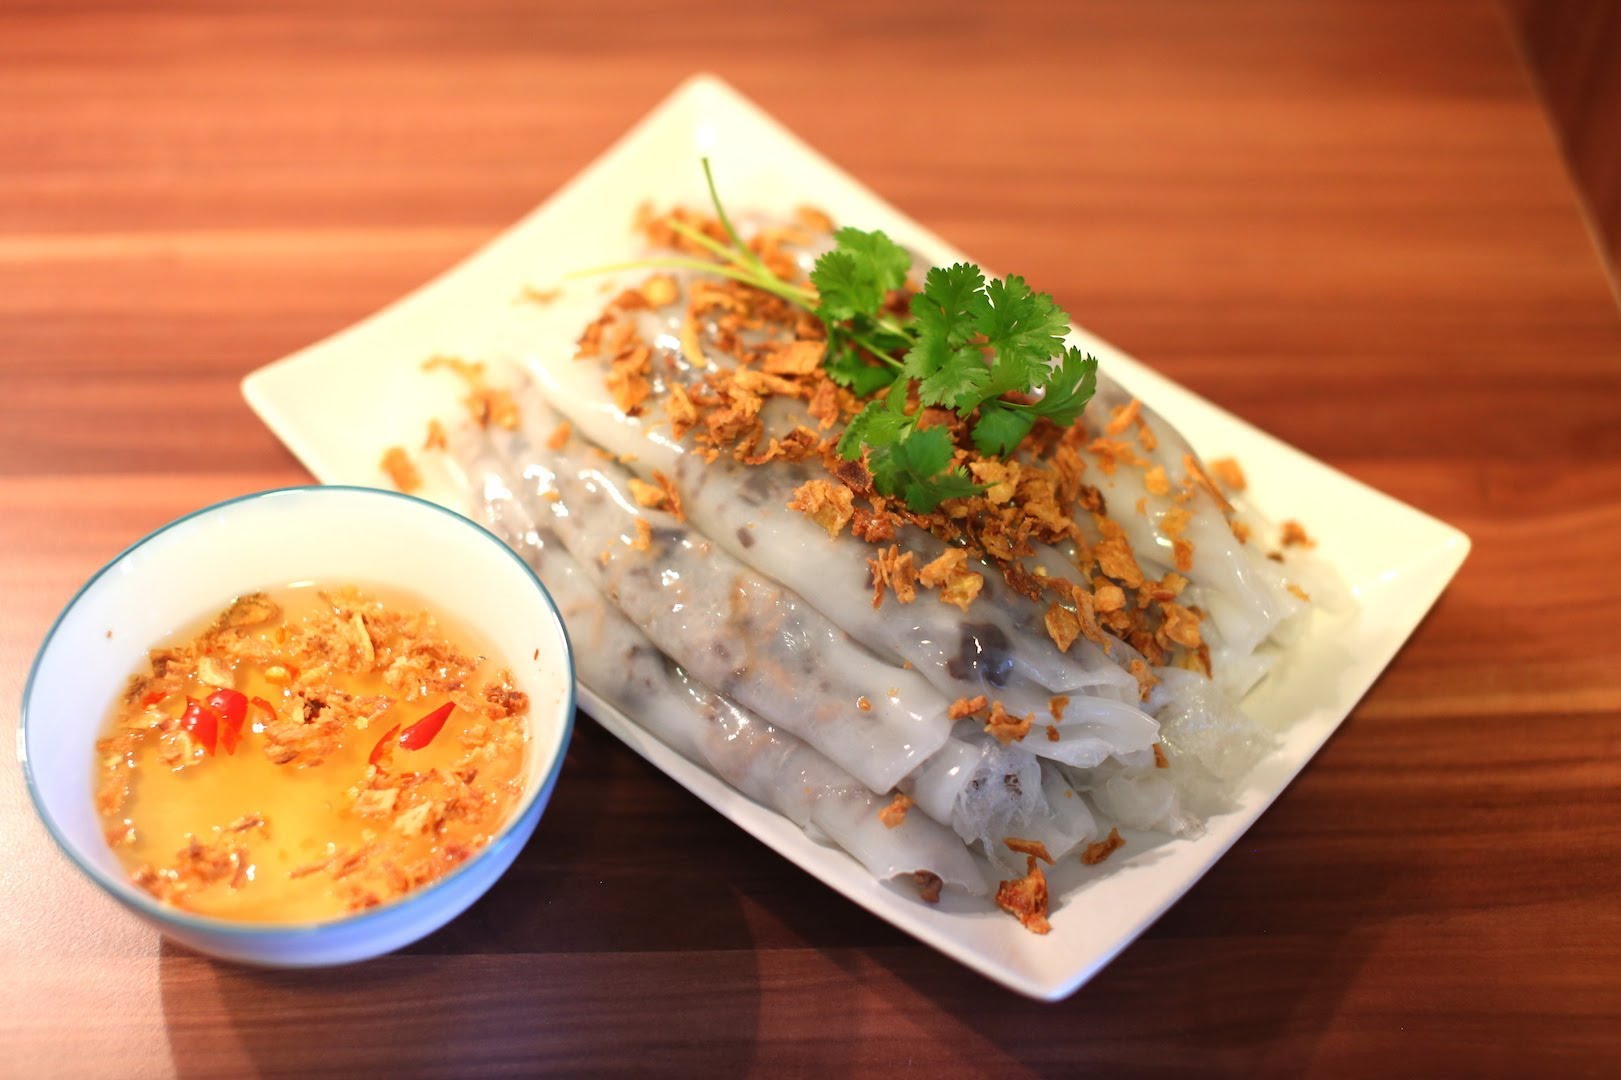 Steamed rice roll is the highlight of Saigon’s food